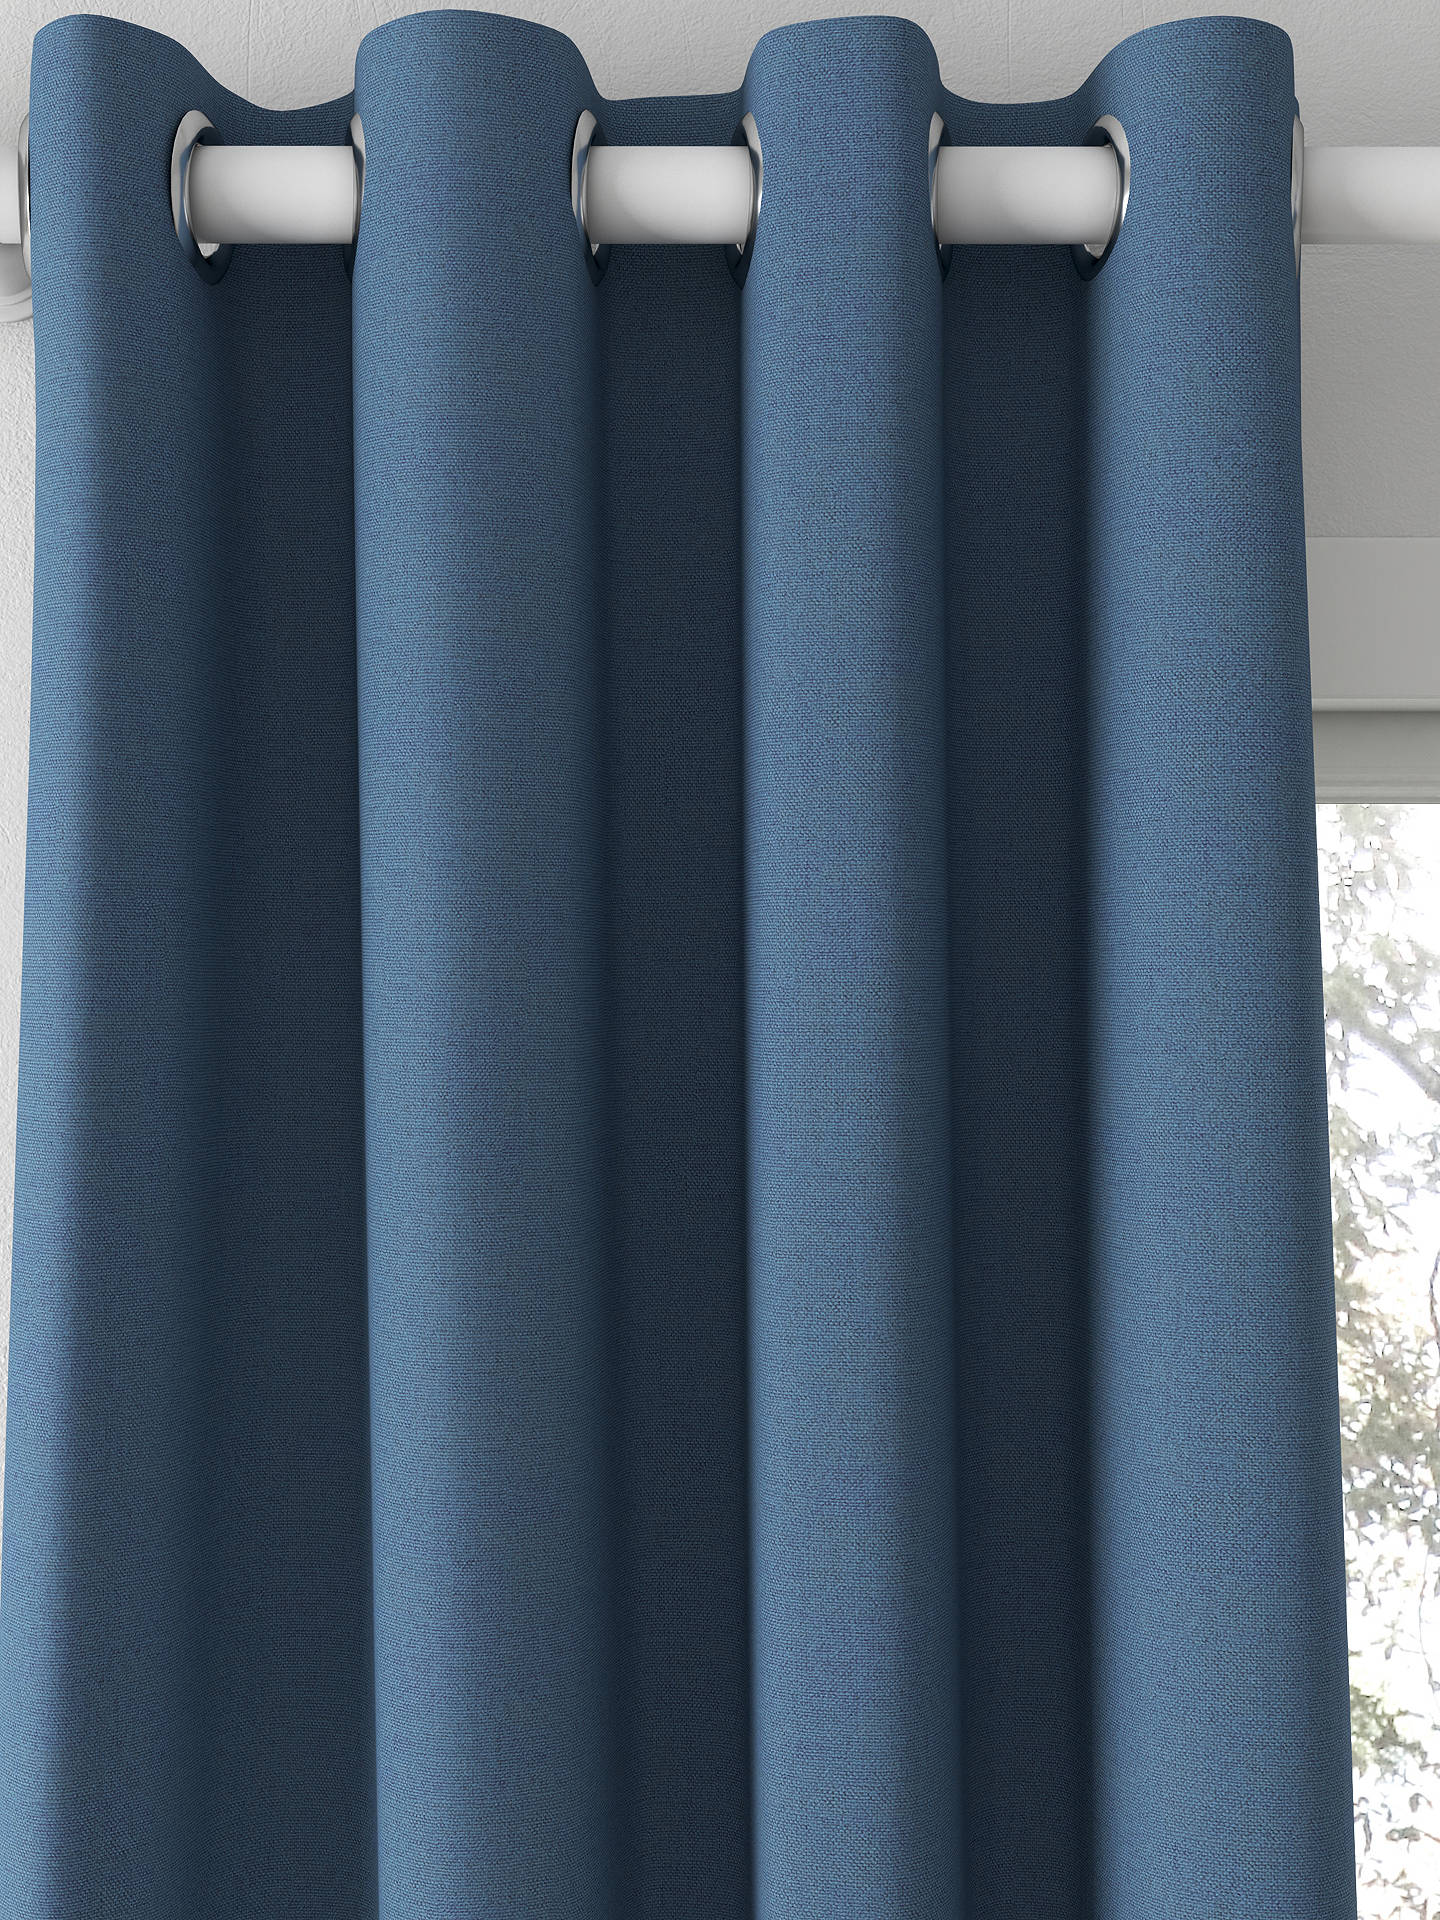 Designers Guild Madrid Made to Measure Curtains, Ocean